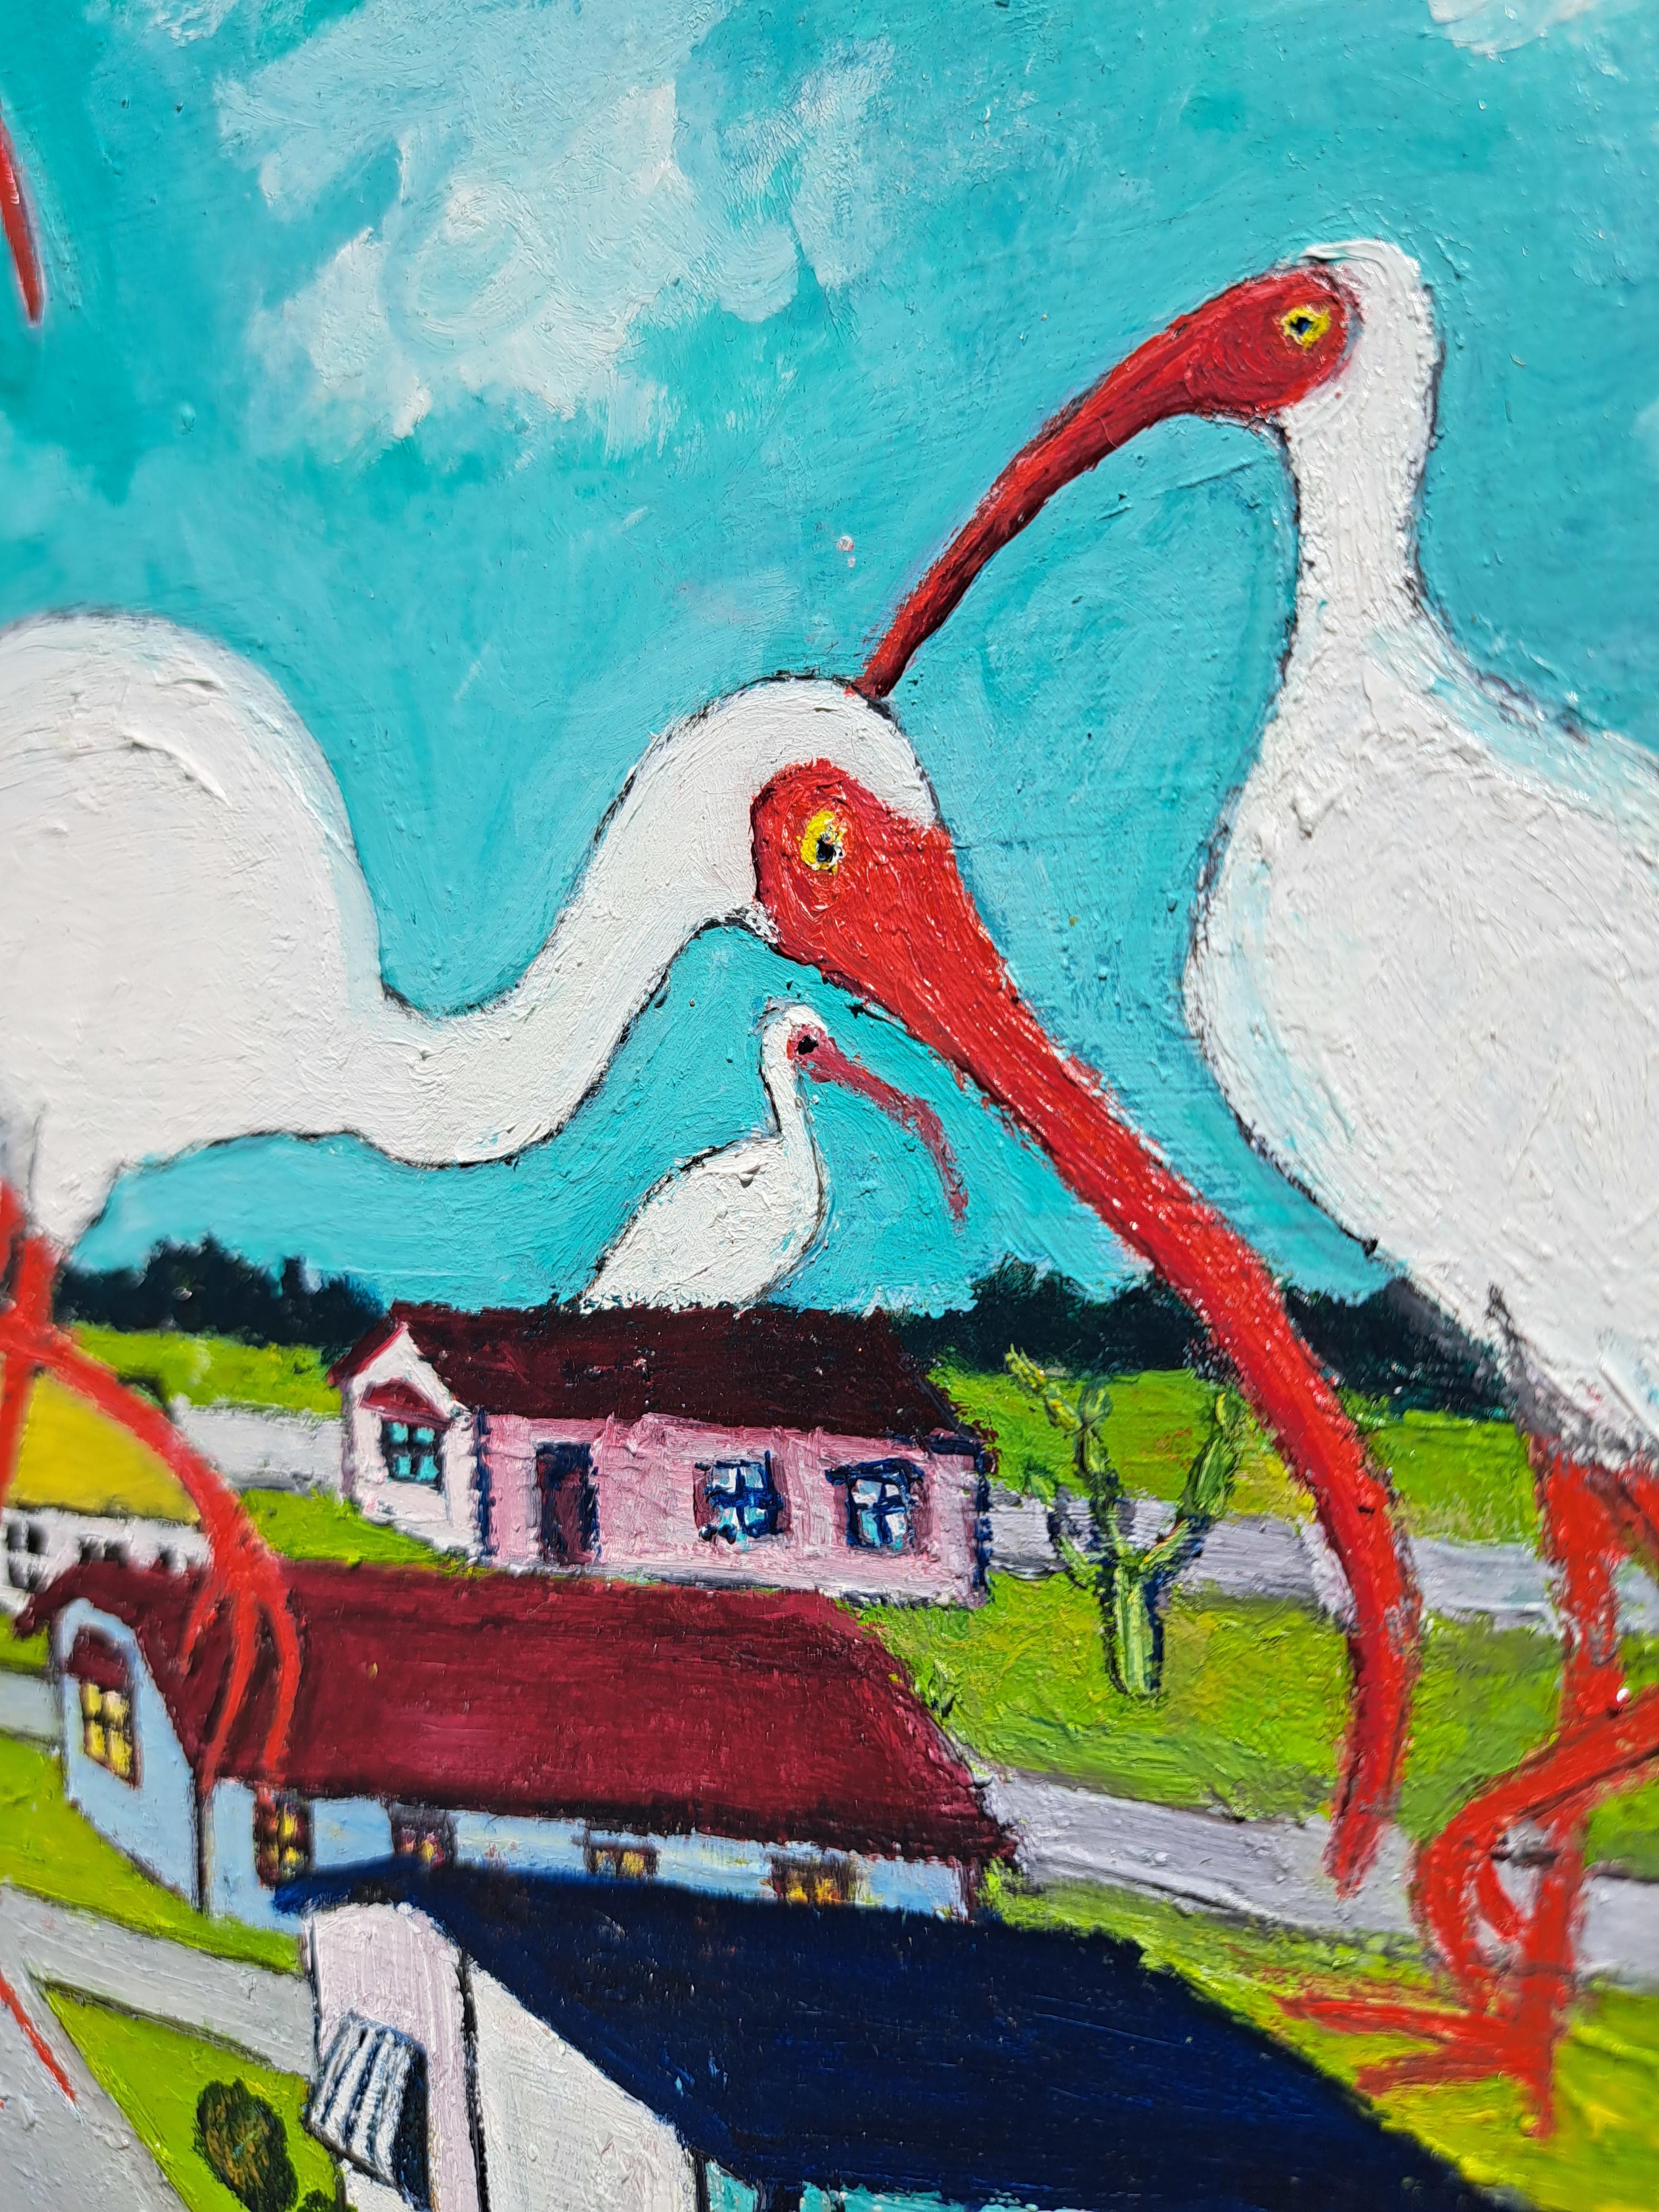 <p>Artist Comments<br>A whimsical scene unfolds as a group of ibis birds roam the lawns of the St. Petersburg neighborhood in Florida. Meanwhile, bunnies residing in the houses watch as the giant birds disrupt their way of life. The composition